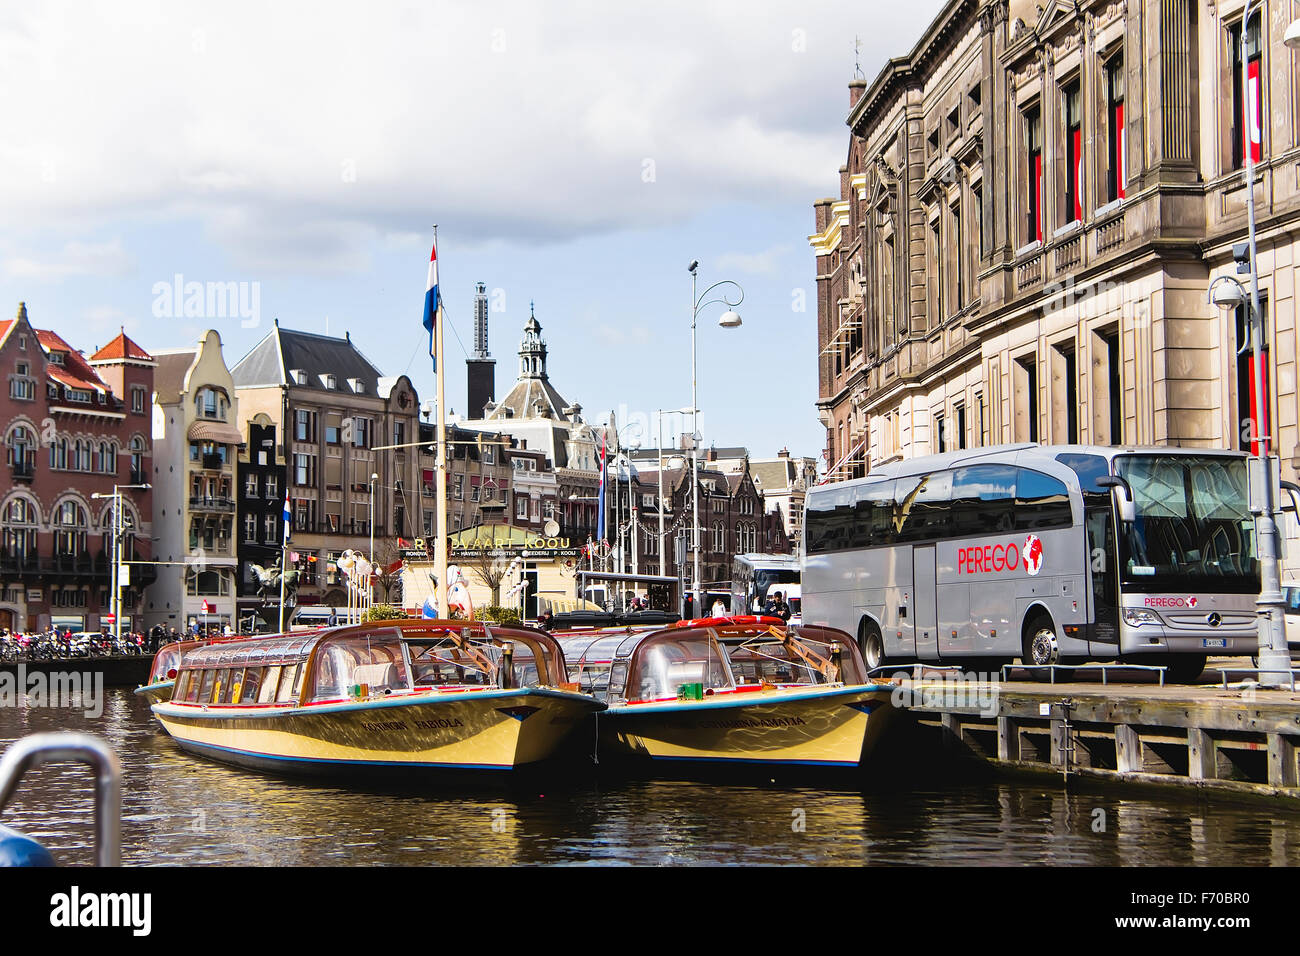 Image of Glass topped tourist canal boats in Amsterdam Stock Photo